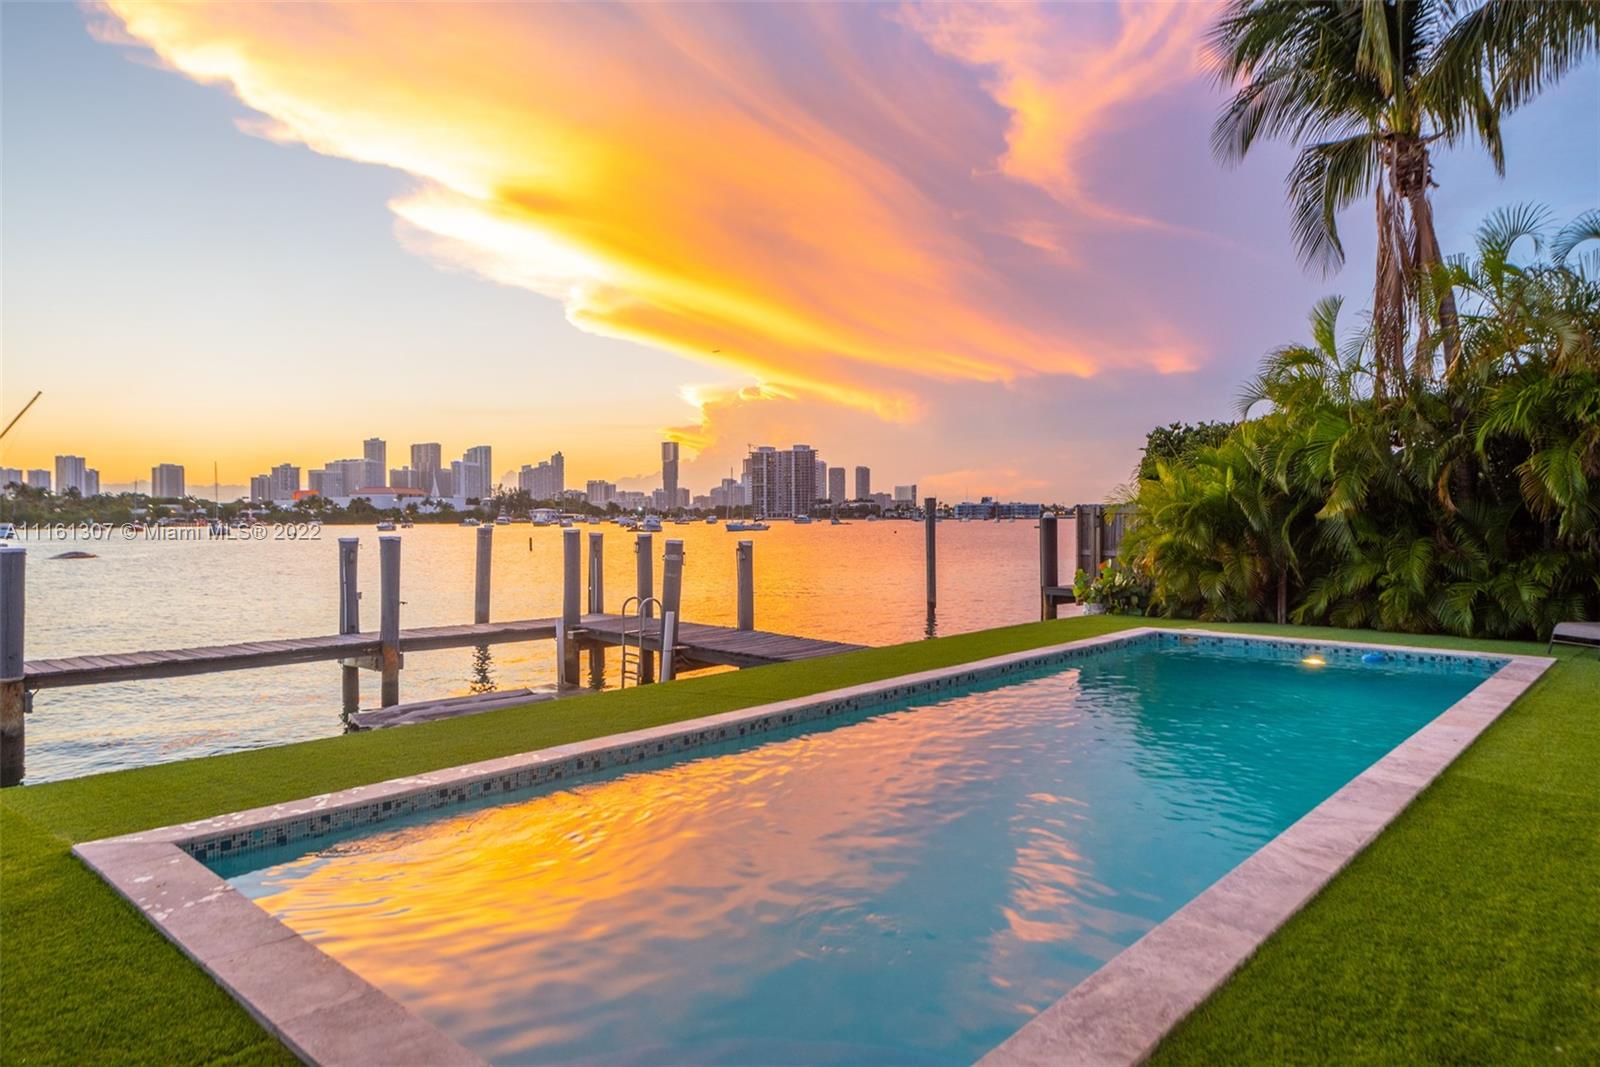 Step Inside With Me! Located on the Western tip of Palm Island, this waterfront home emanates character and charm while showcasing the most desired view in town - the Miami Skyline. Hosting 4 beds, 3 baths, this efficient floor plan leaves room for expansion. The primary suite extends into a lounge area overlooking the breathtaking water and city views. This home is finished with travertine and original wood flooring. Entertain under the covered porch or in the open lounge space by the heated pool. Ideal for a boater with 79 feet of wide water frontage and new dock. Recently renovated, this home is complete with a new roof, driveway, gate, and plumbing and electric redone. Palm Island is a prime location in close proximity to South Beach and Downtown Miami.